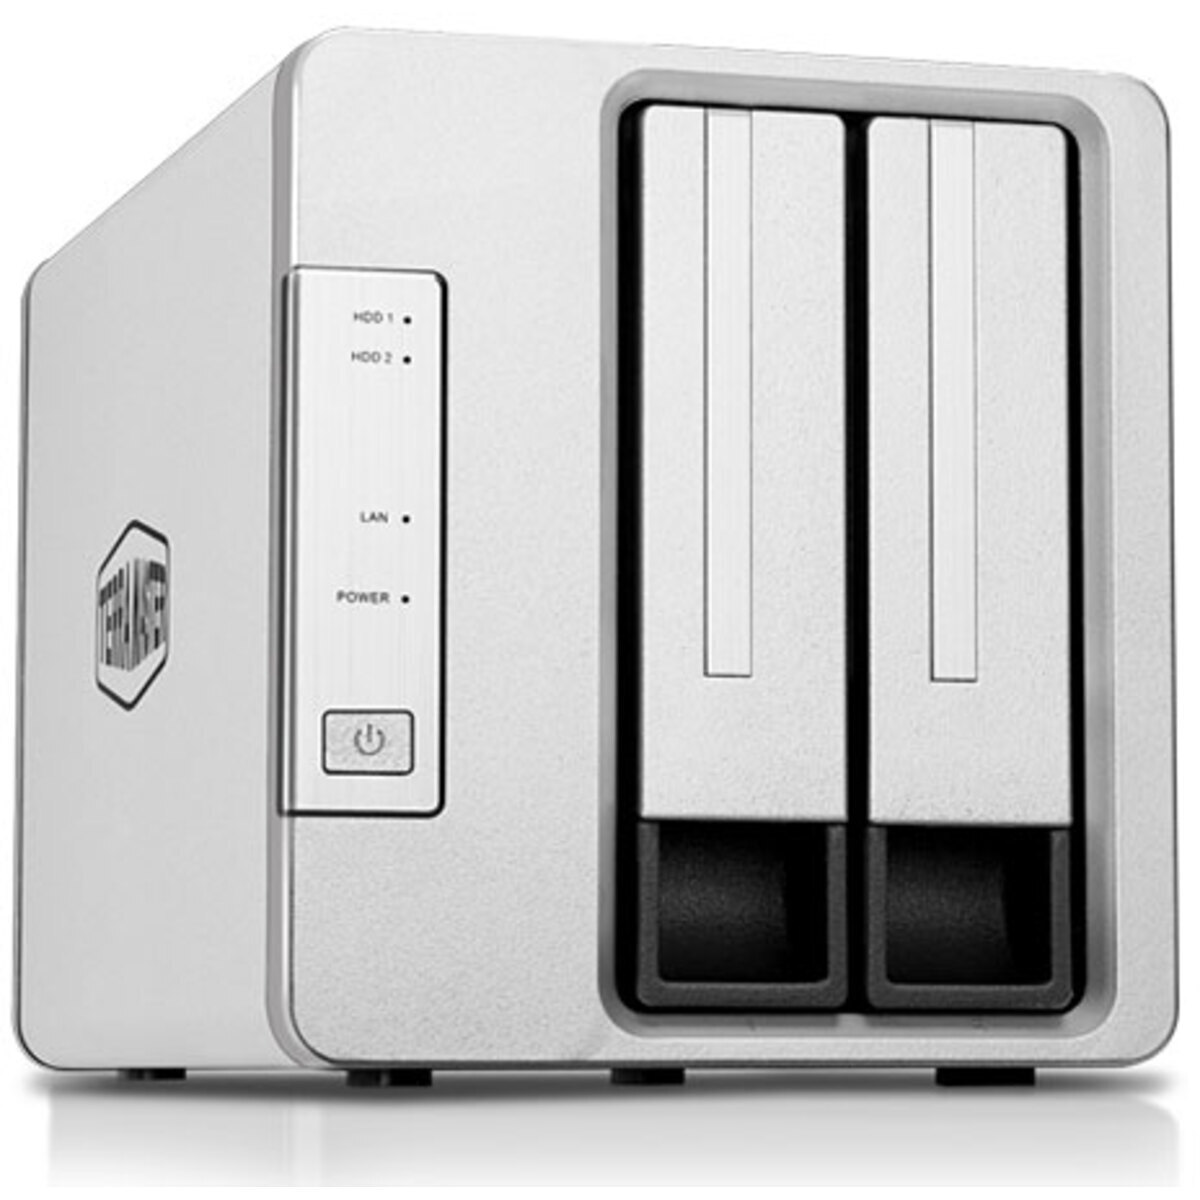 TerraMaster F2-223 44tb 2-Bay Desktop Personal / Basic Home / Small Office NAS - Network Attached Storage Device 2x22tb Seagate IronWolf Pro ST22000NT001 3.5 7200rpm SATA 6Gb/s HDD NAS Class Drives Installed - Burn-In Tested - FREE RAM UPGRADE F2-223